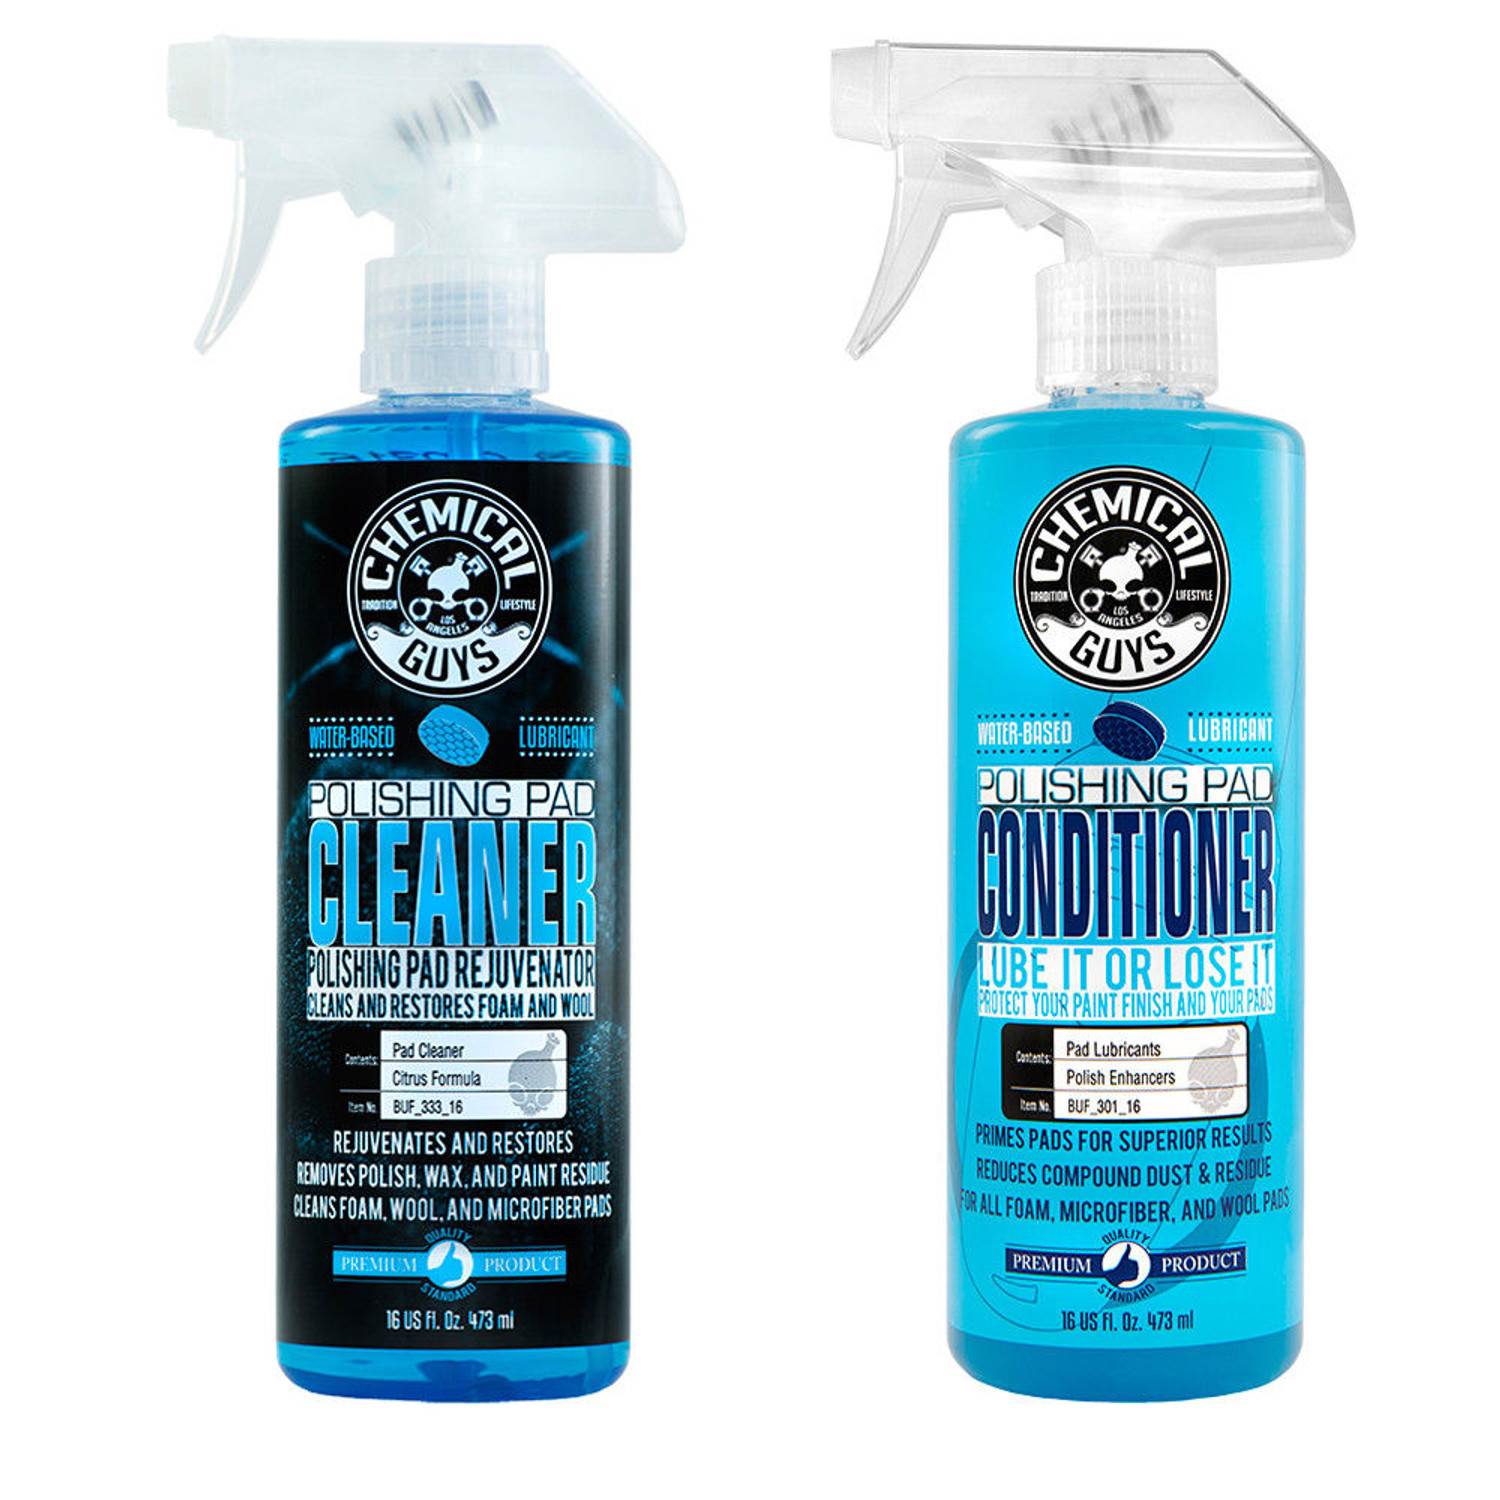 Chemical Guys Polishing Pad Cleaner & Conditioner Spray Combo Kit